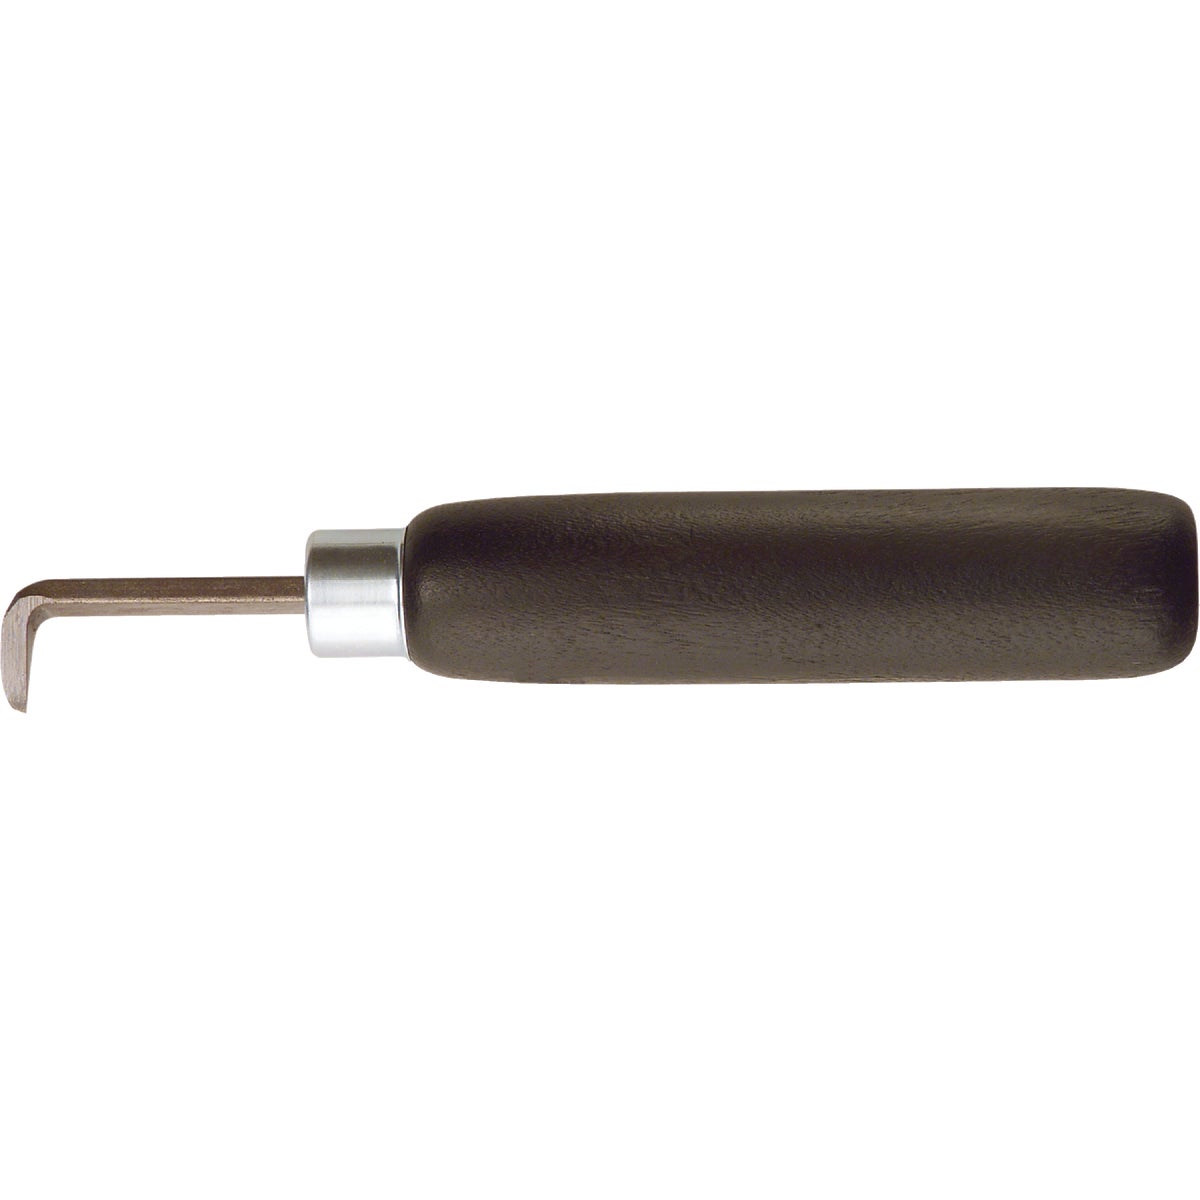 Item 787208, Convenient tool cleans and opens cracks for patching. Carbon steel blade.